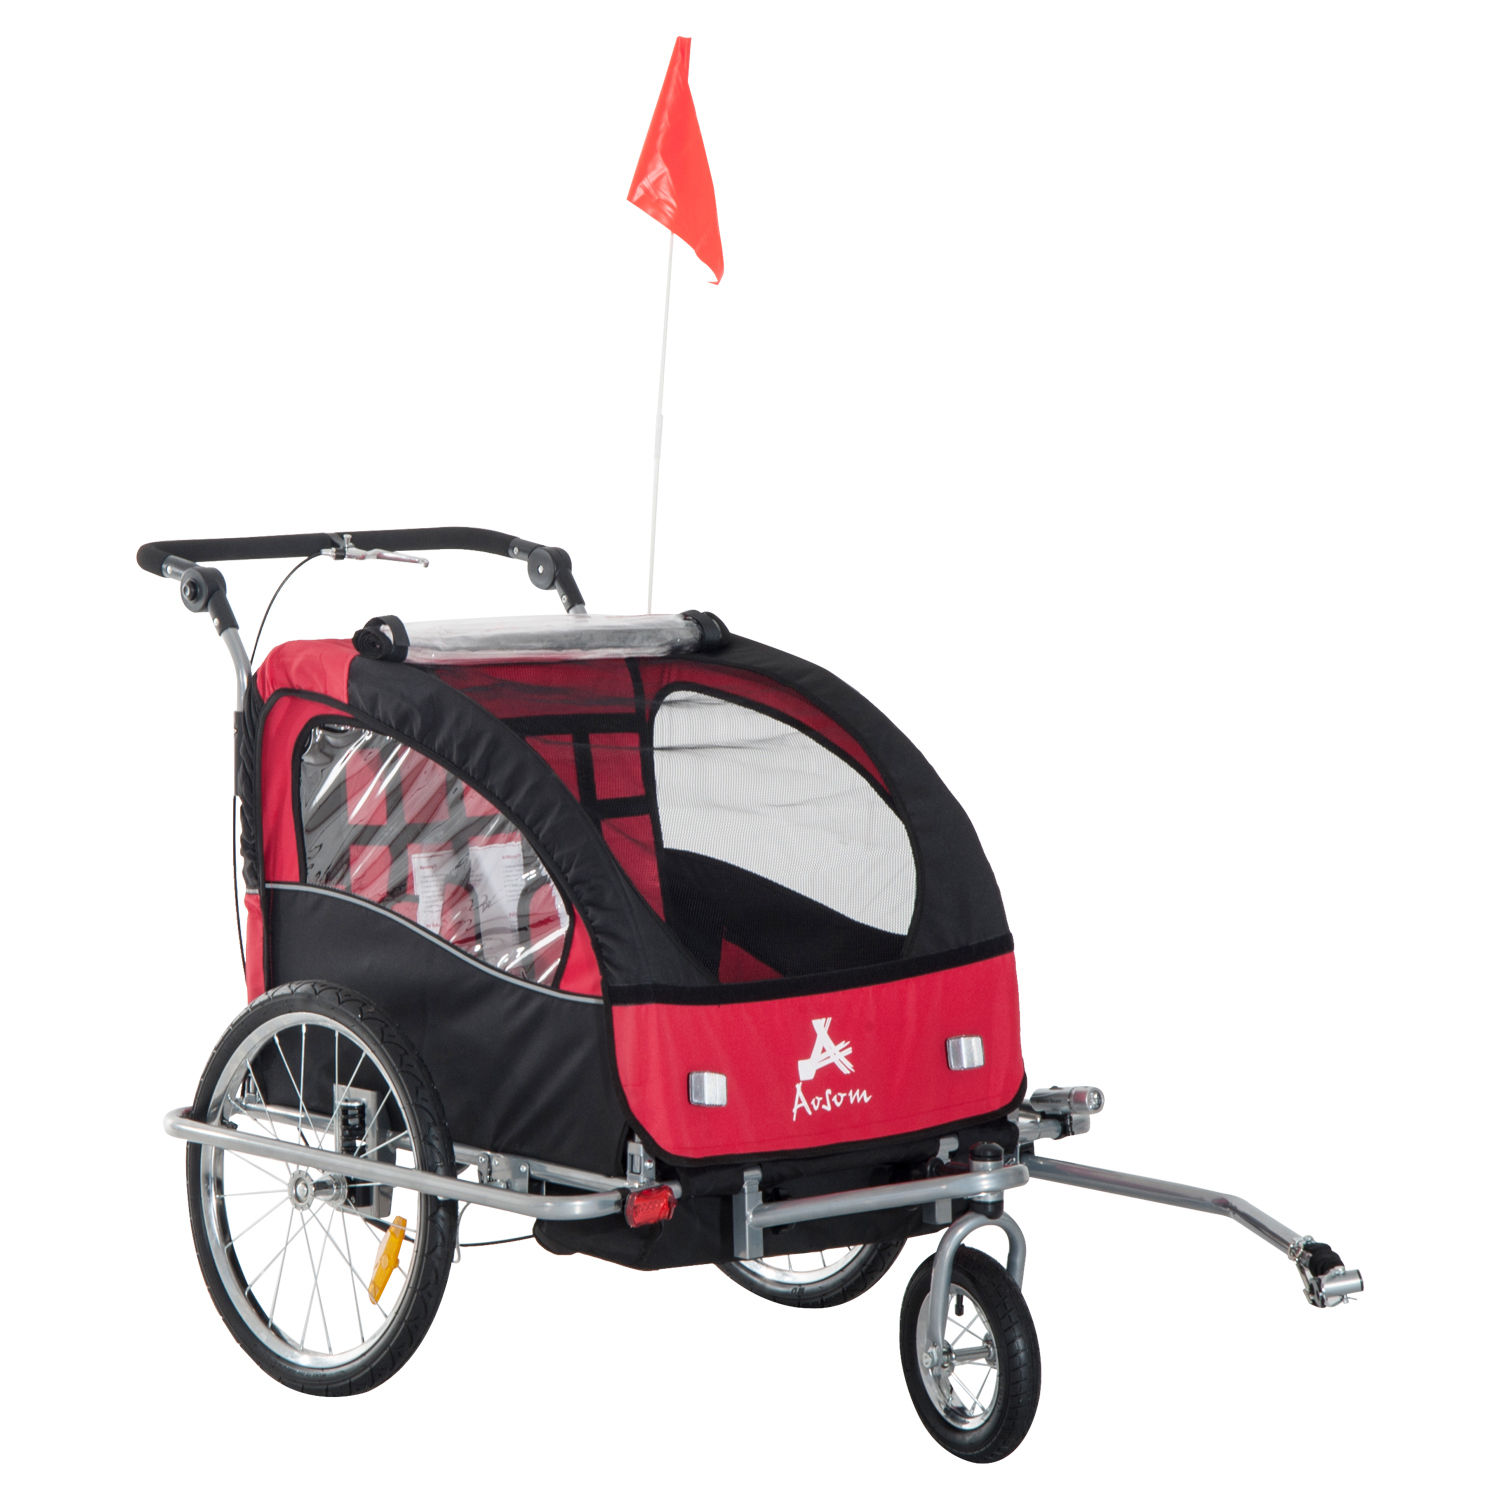 Aosom Elite II 2-In-1 Double Child Two-Wheel Bicycle Trailer, Stroller and Jogger with 2 Safety Harnesses - Red / Black